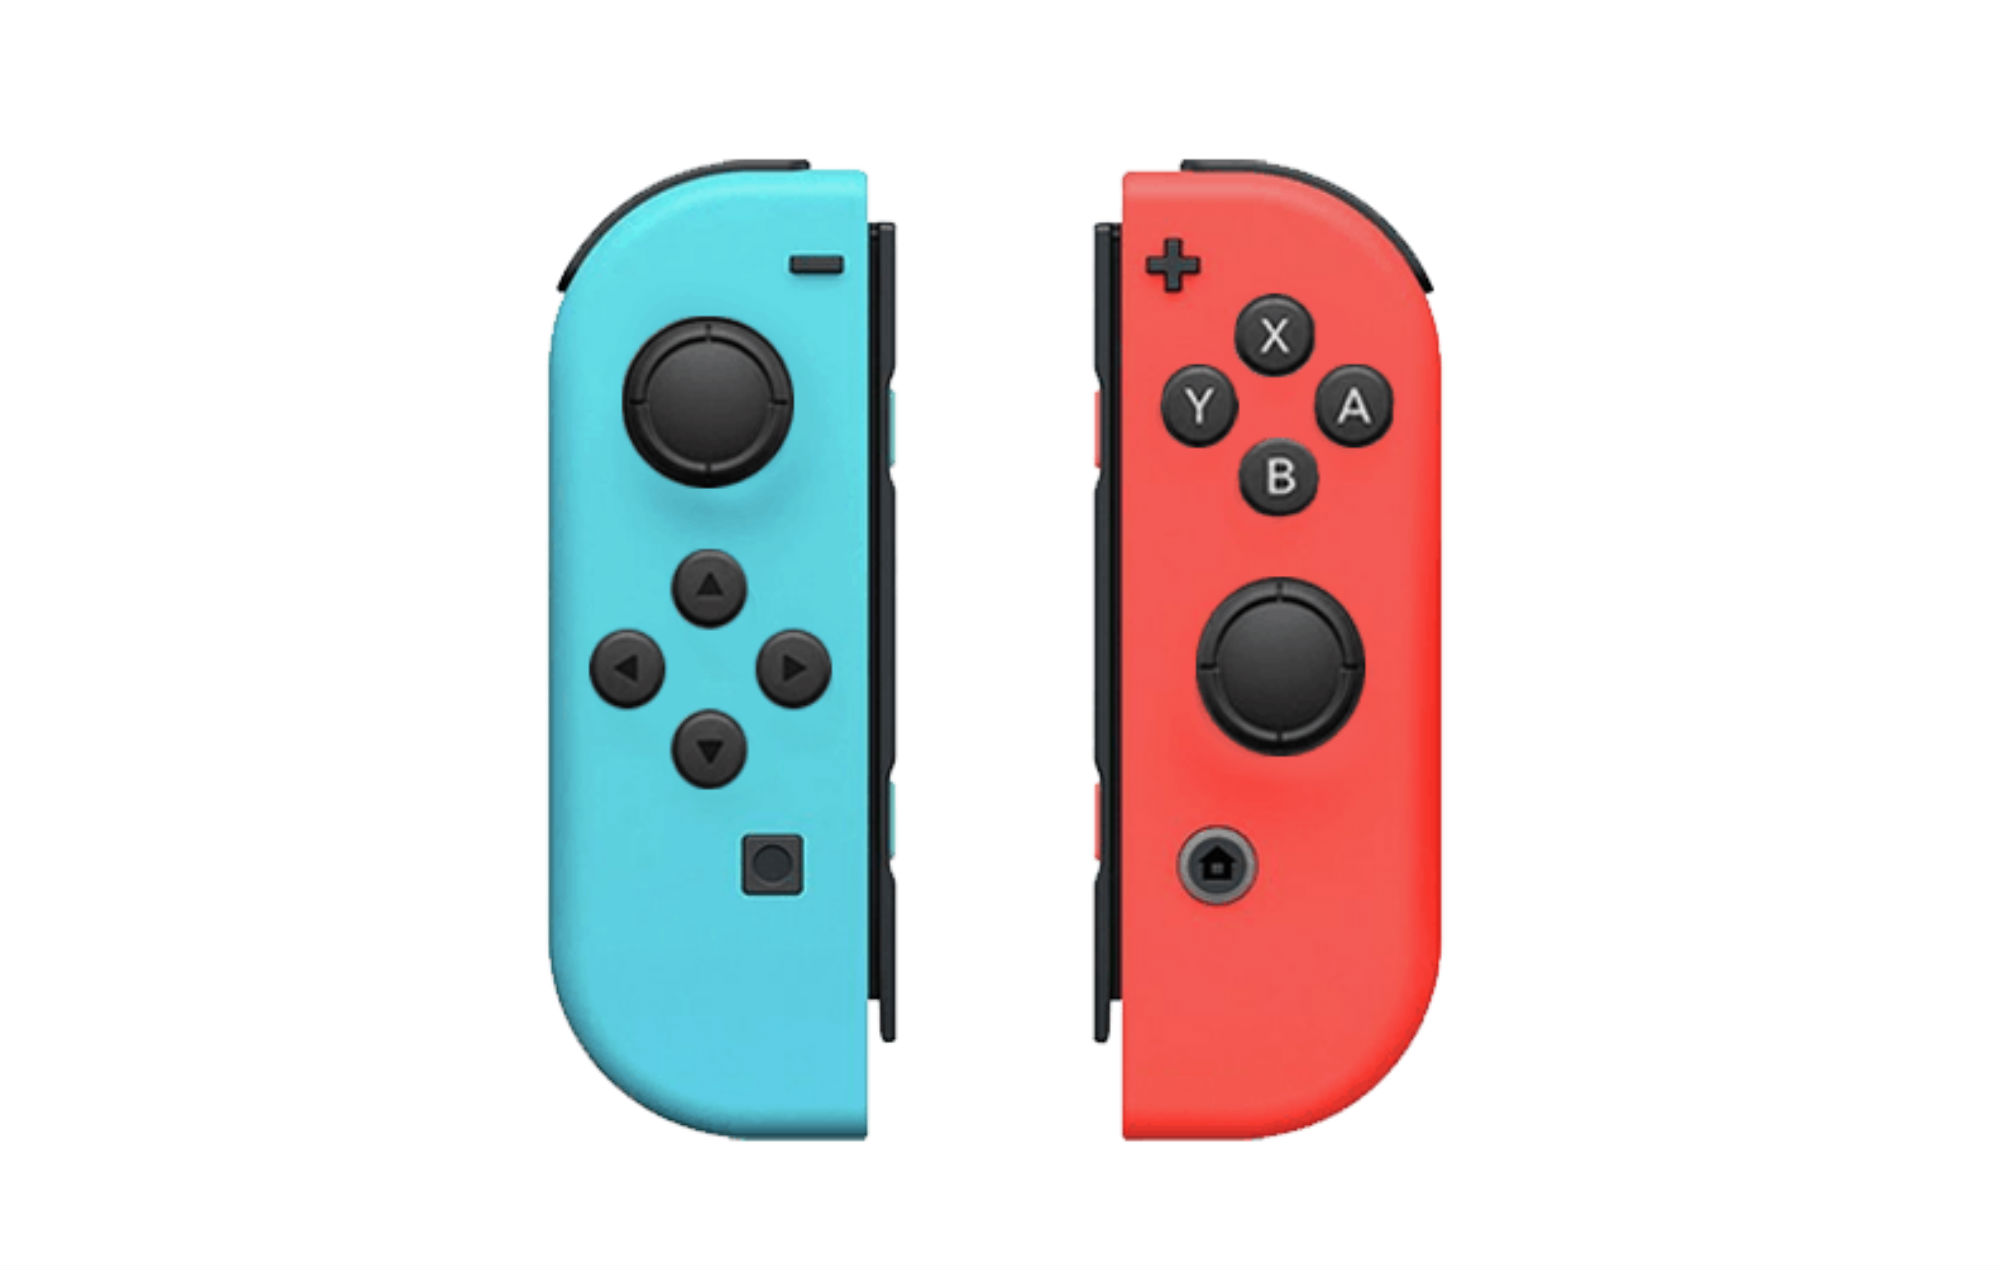  missing-nintendo-switch-joy-cons-controllers 